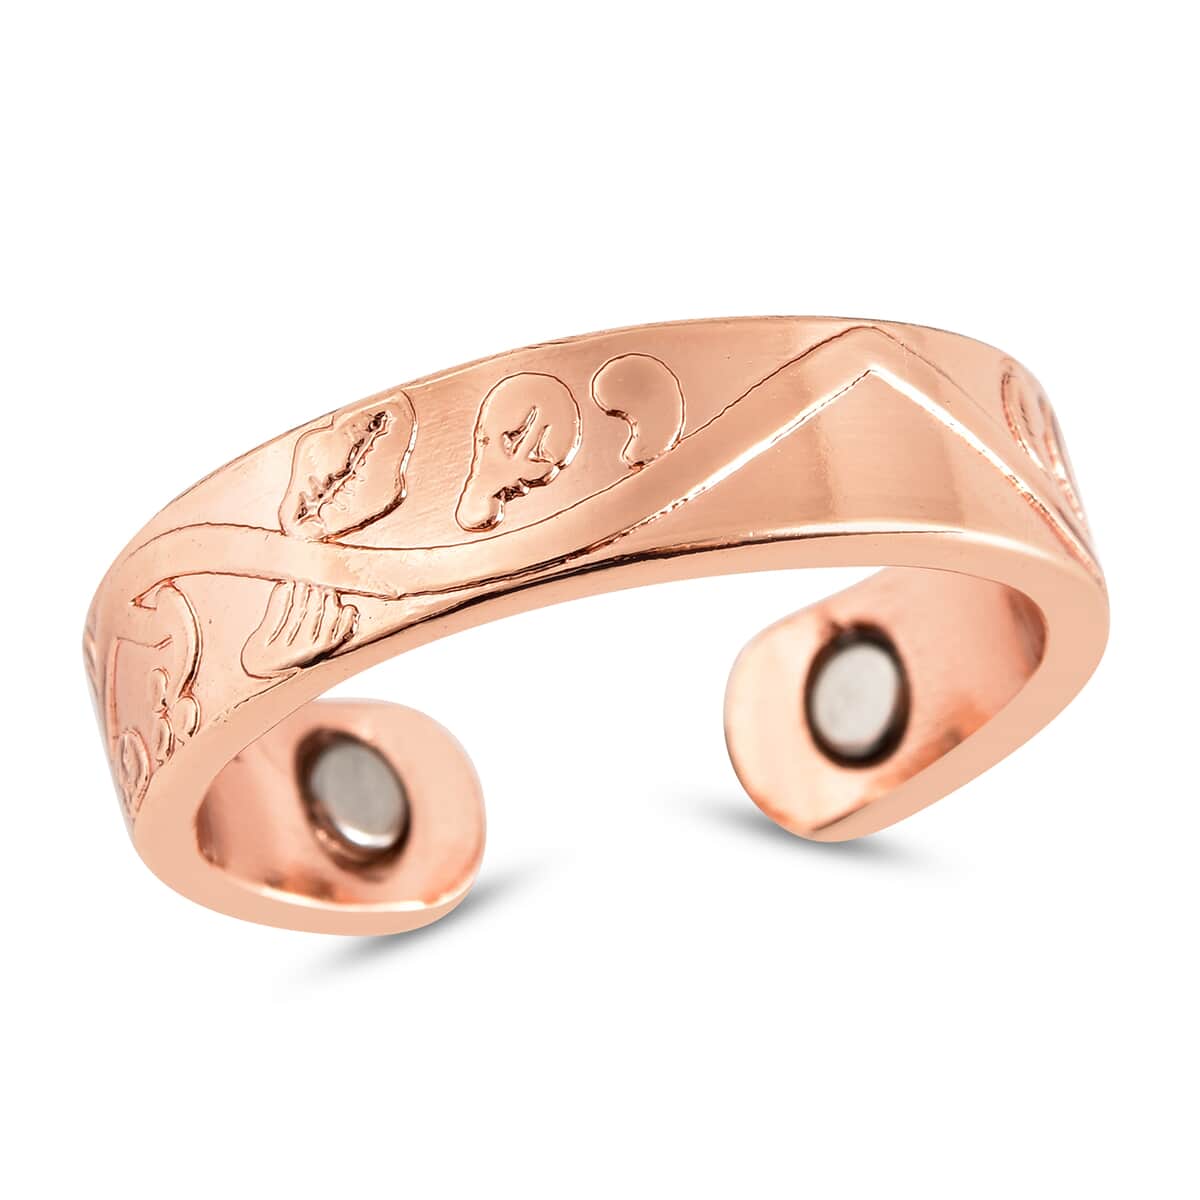 Magnetic By Design Floral Vine Pattern Open Shank Ring in Rosetone (Fits Sizes 6-8) image number 0